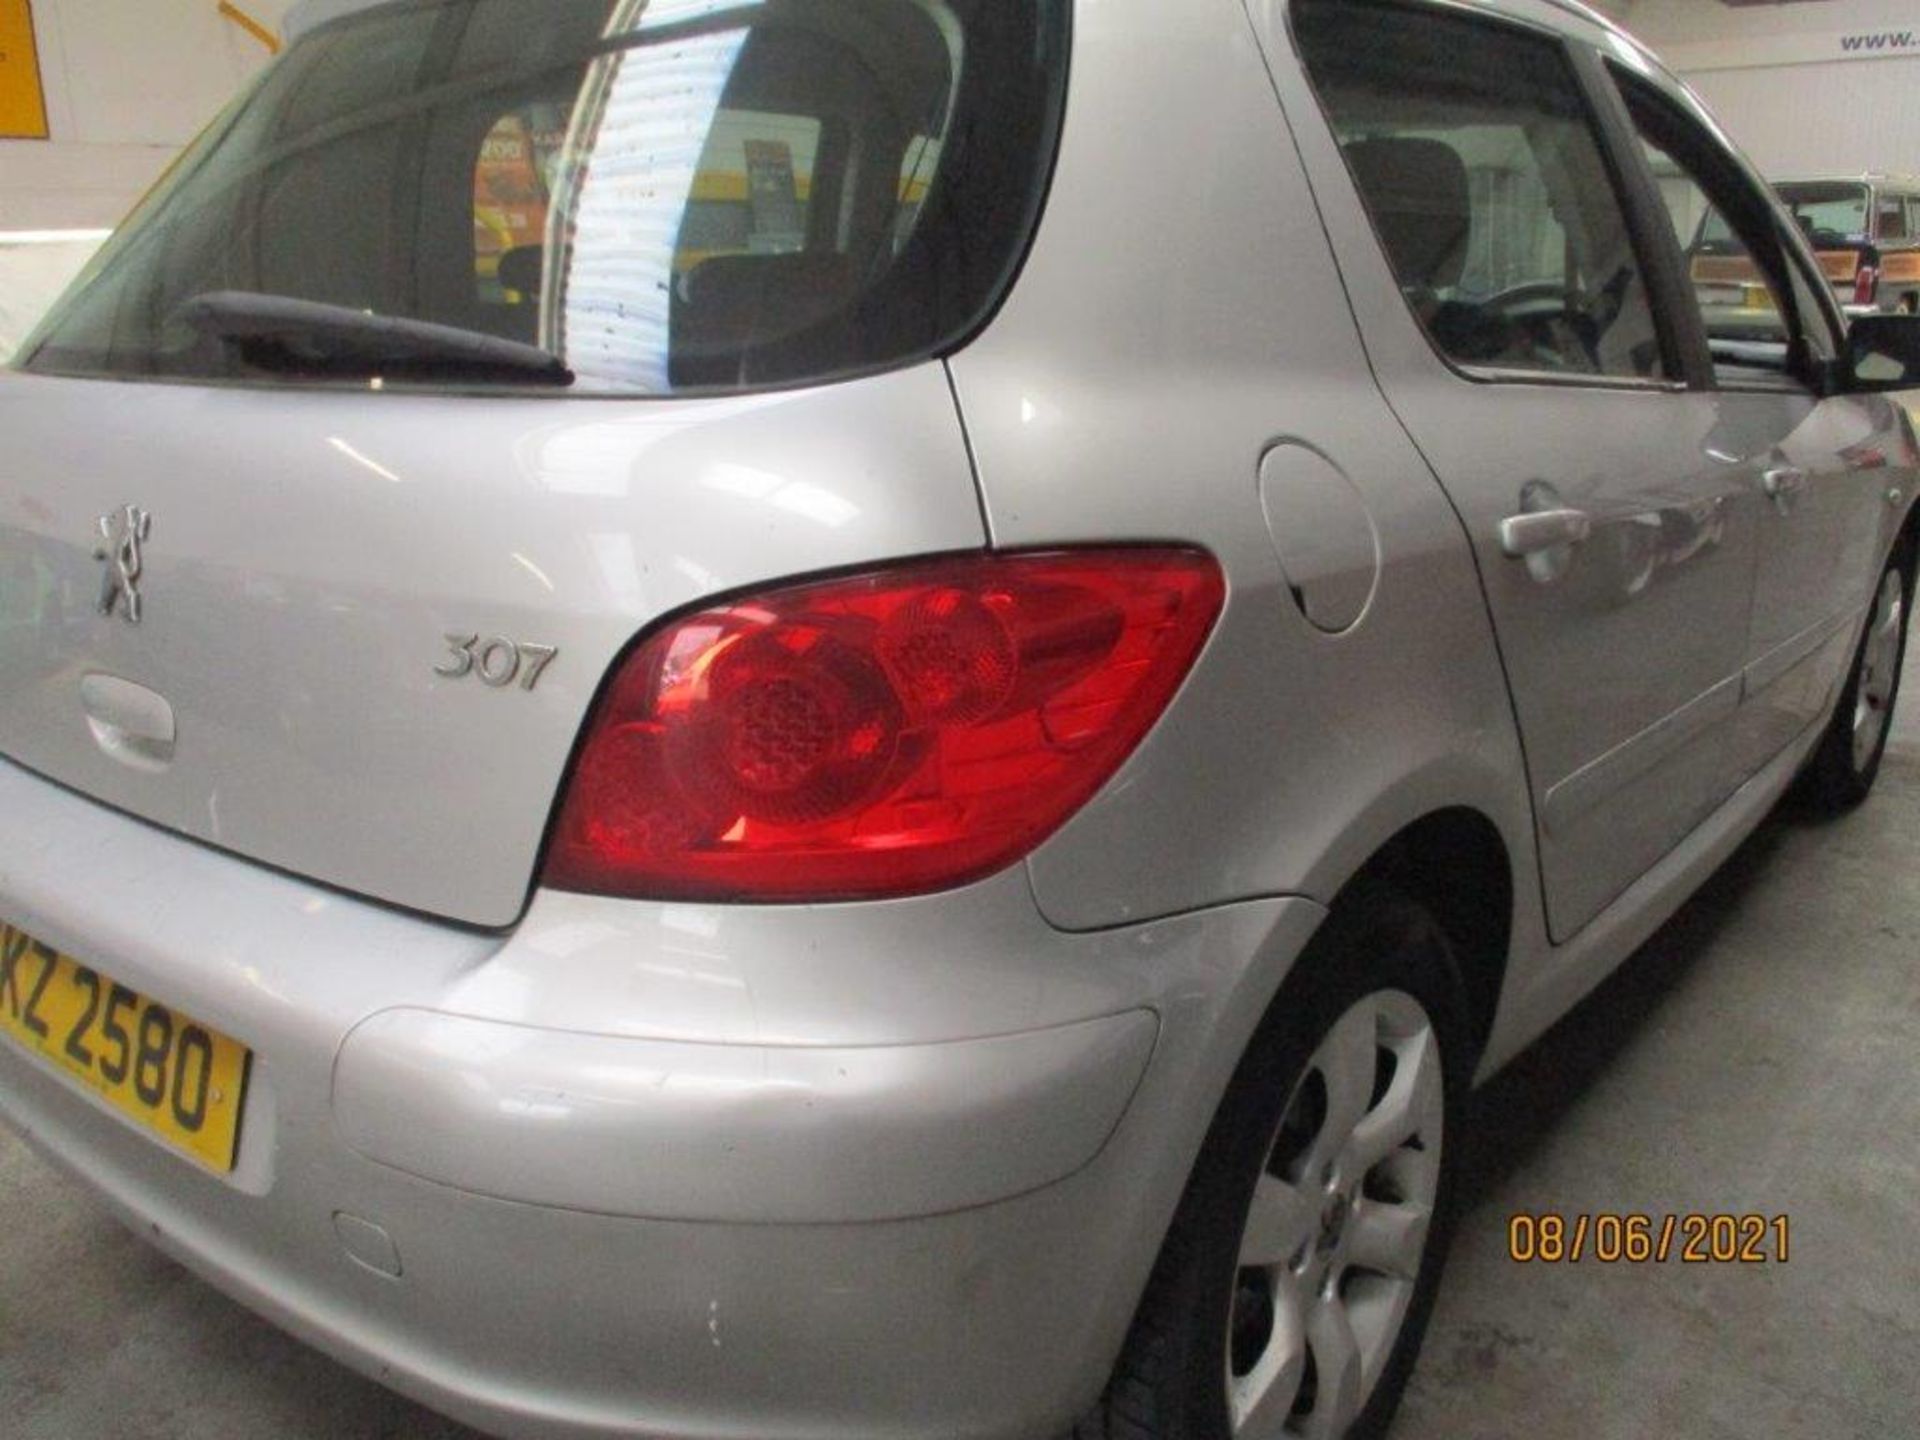 56 06 Peugeot 307 S - Image 4 of 21